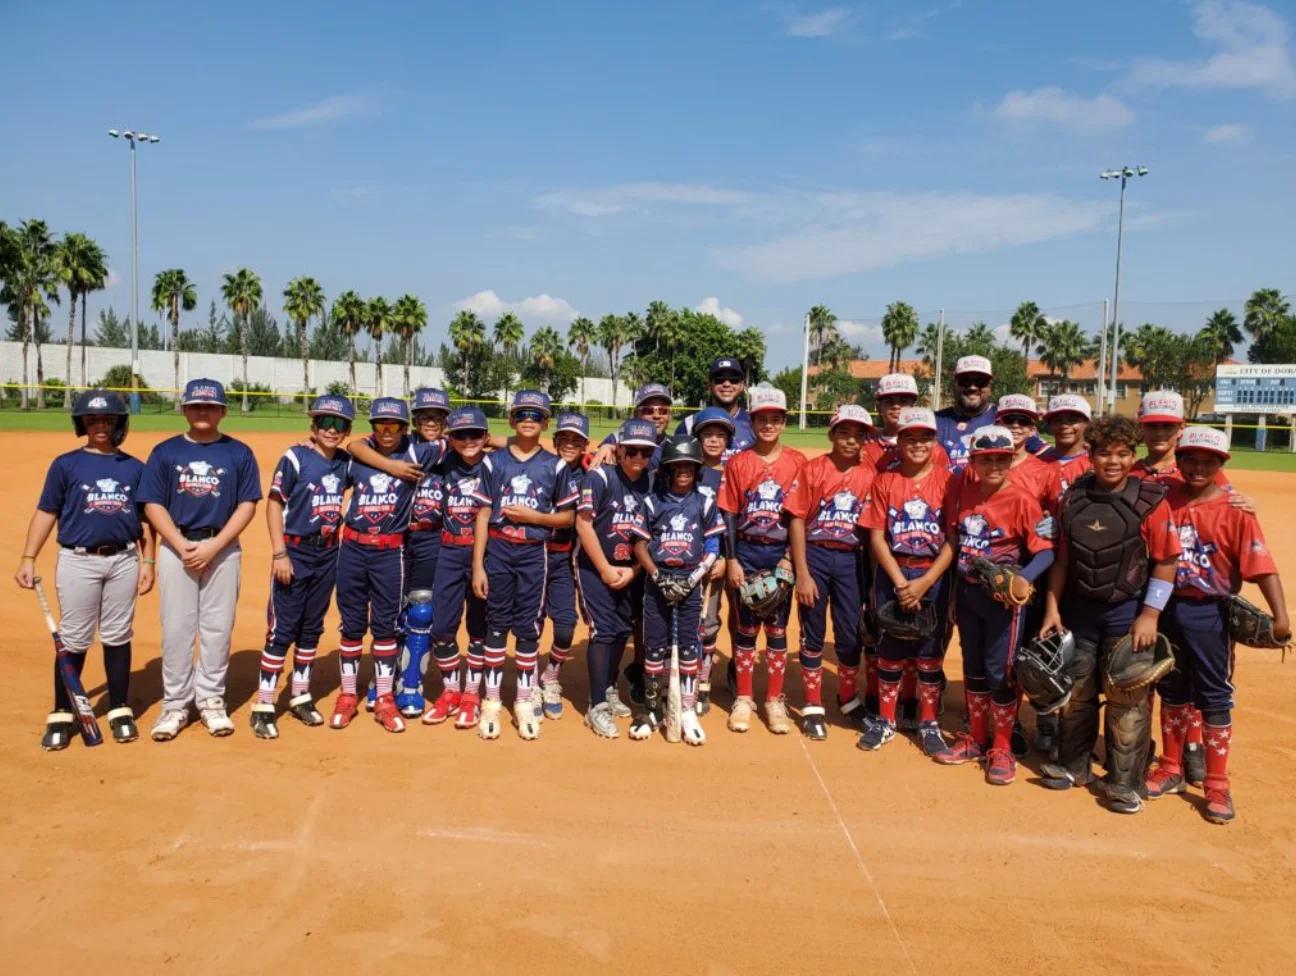 Doral Little League | Happier families & greater value: how TeamSnap enabled growth